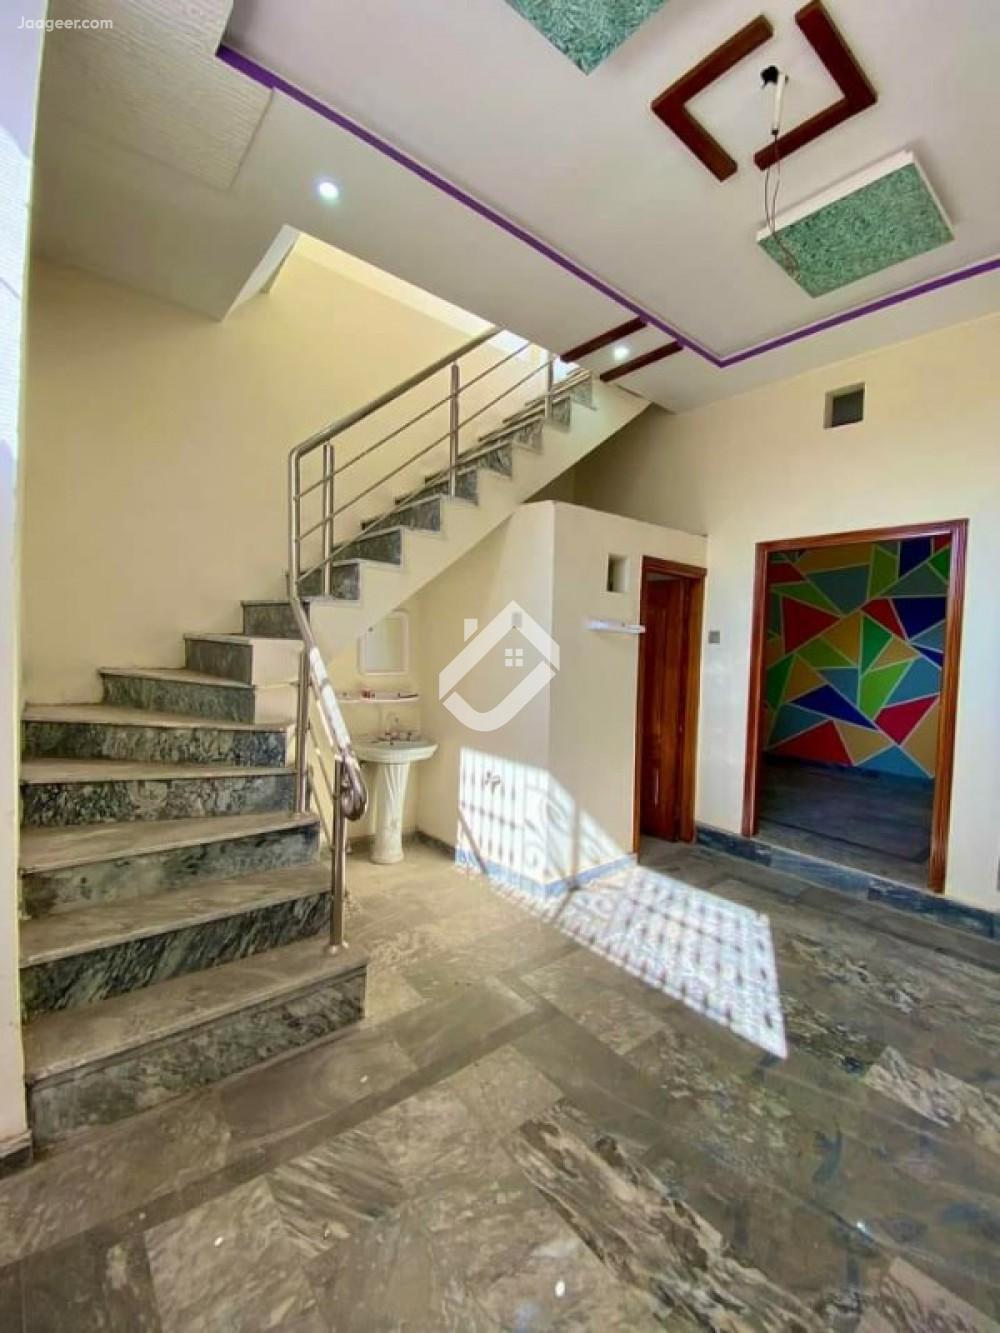 View  2.5 Marla Double Storey House For Sale  At Sillanwali Road in Sillanwali Road, Sargodha